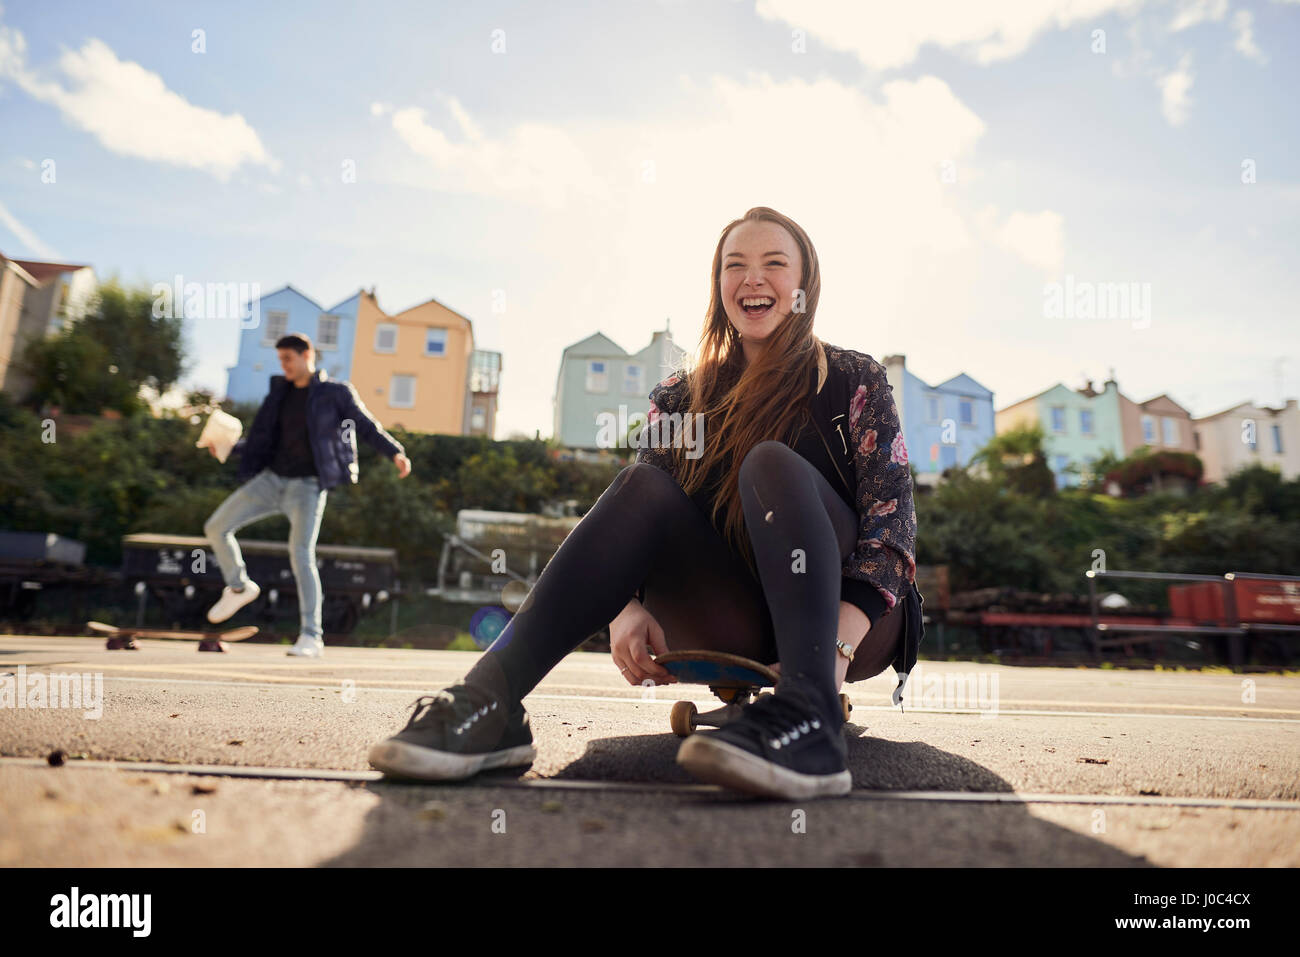 Two friends fooling around outdoors, young woman sitting on skateboard, laughing, Bristol, UK Stock Photo